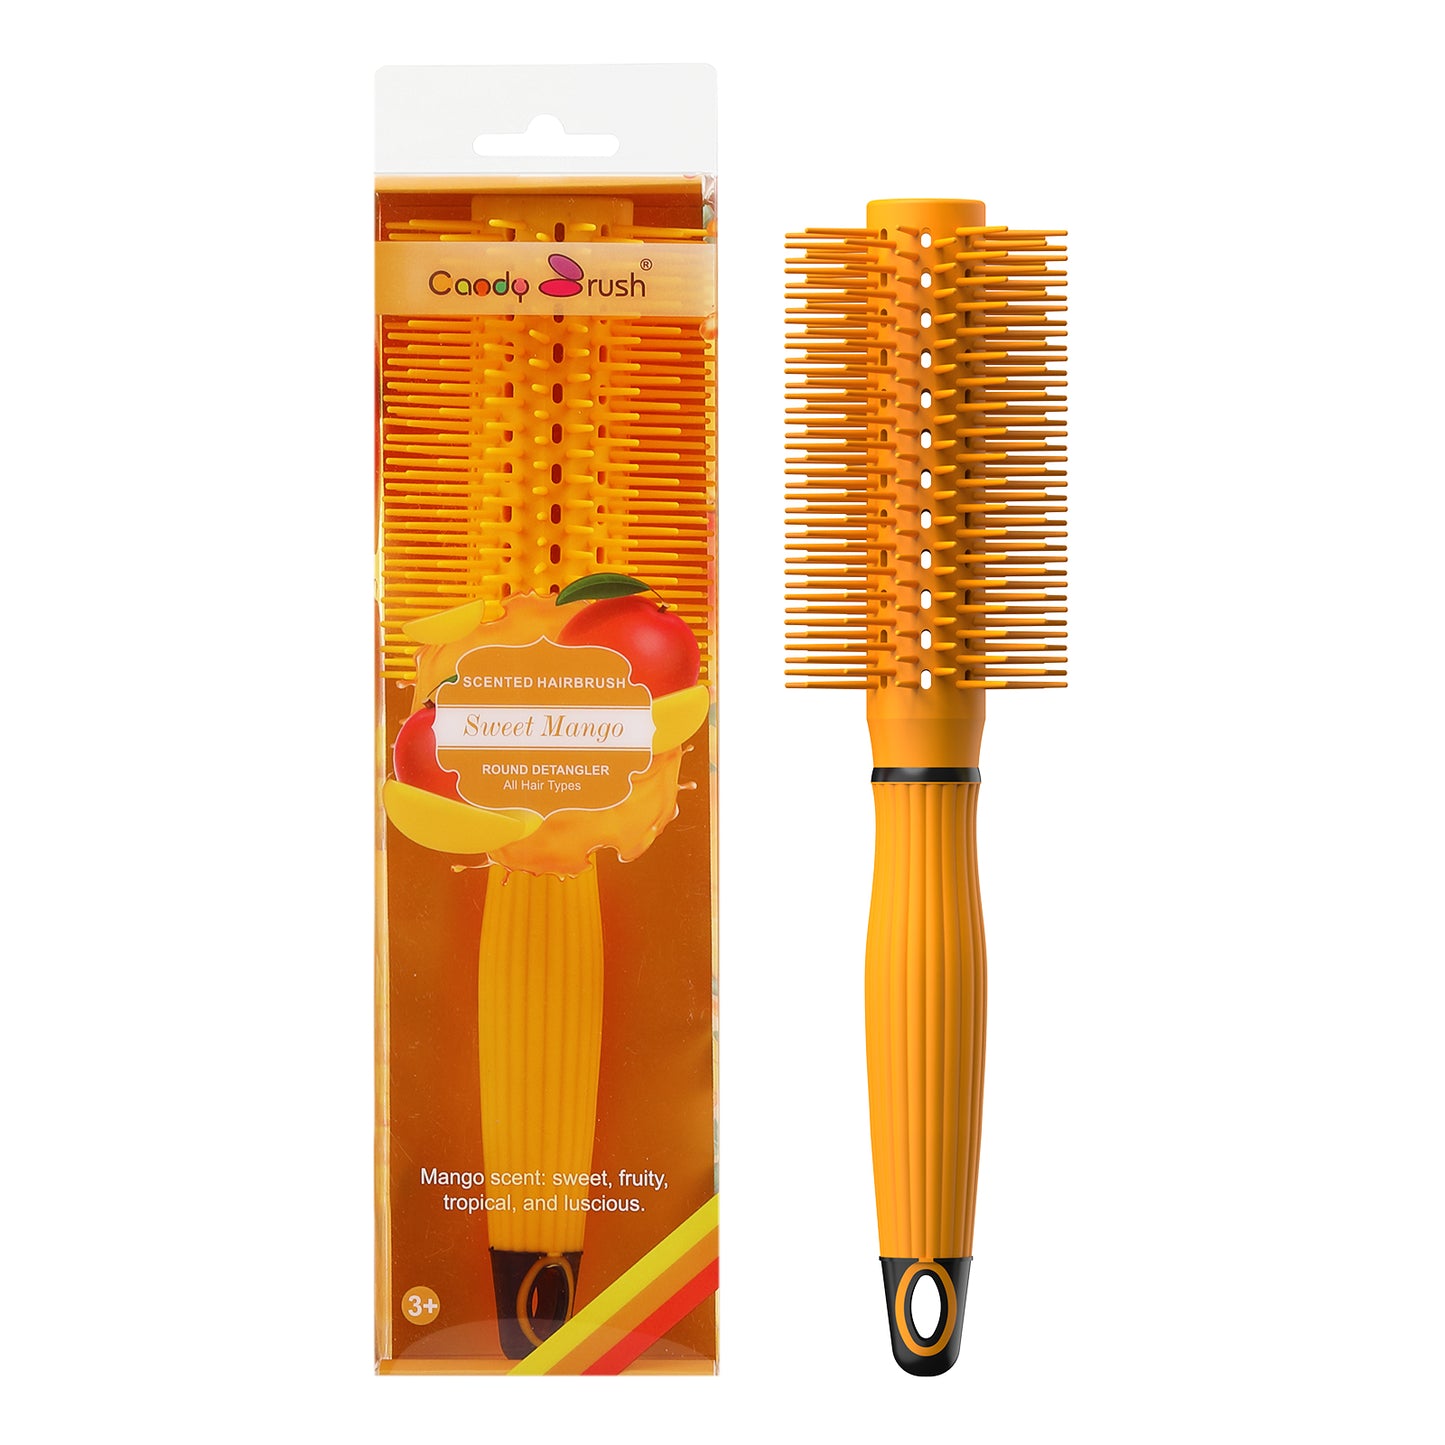 Round Brush for Blow Drying Dryer Large Round Hair Barrel Brush Scented TPEE Plastic Bristles Ionic Tech Round Barrel Brush Soft Bristle for Styling Curling Shine Anti-Static Curling Hairbrush